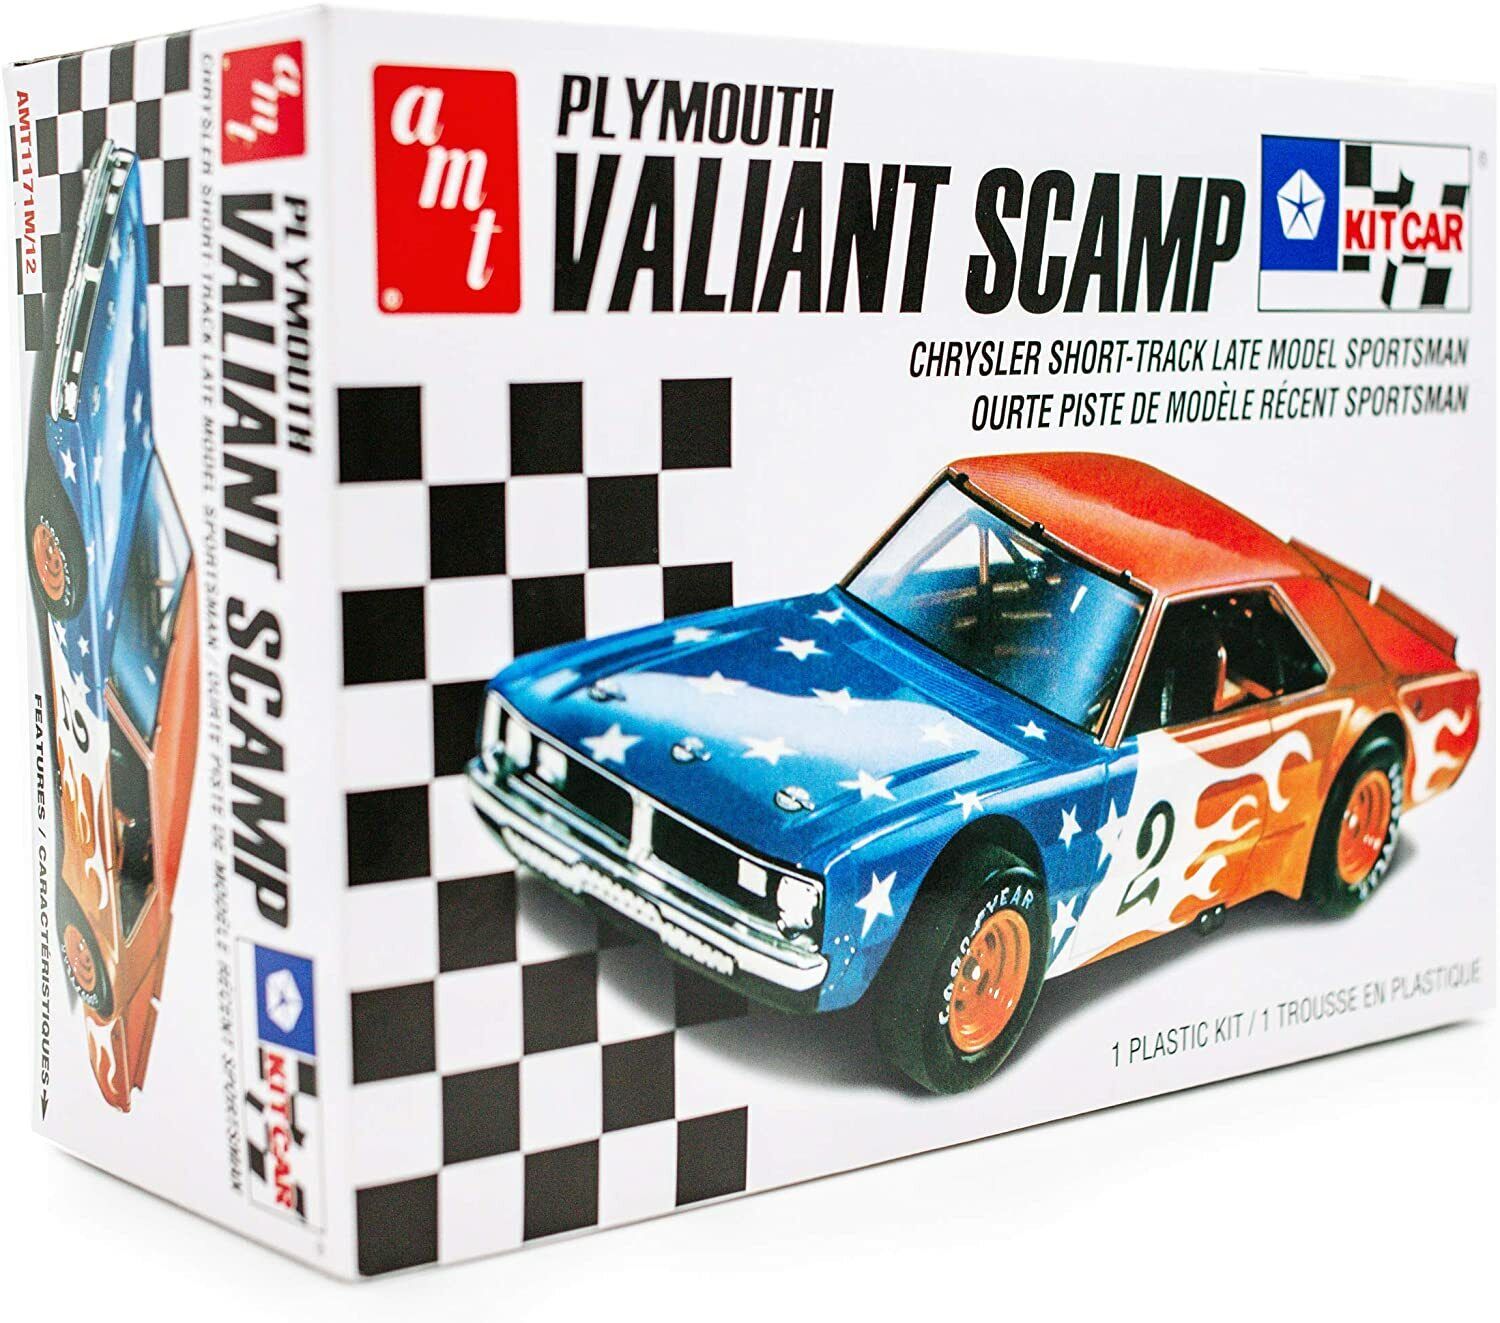 AMT 1171M/12 1/25 Plymouth Valiant Scamp Kit Car